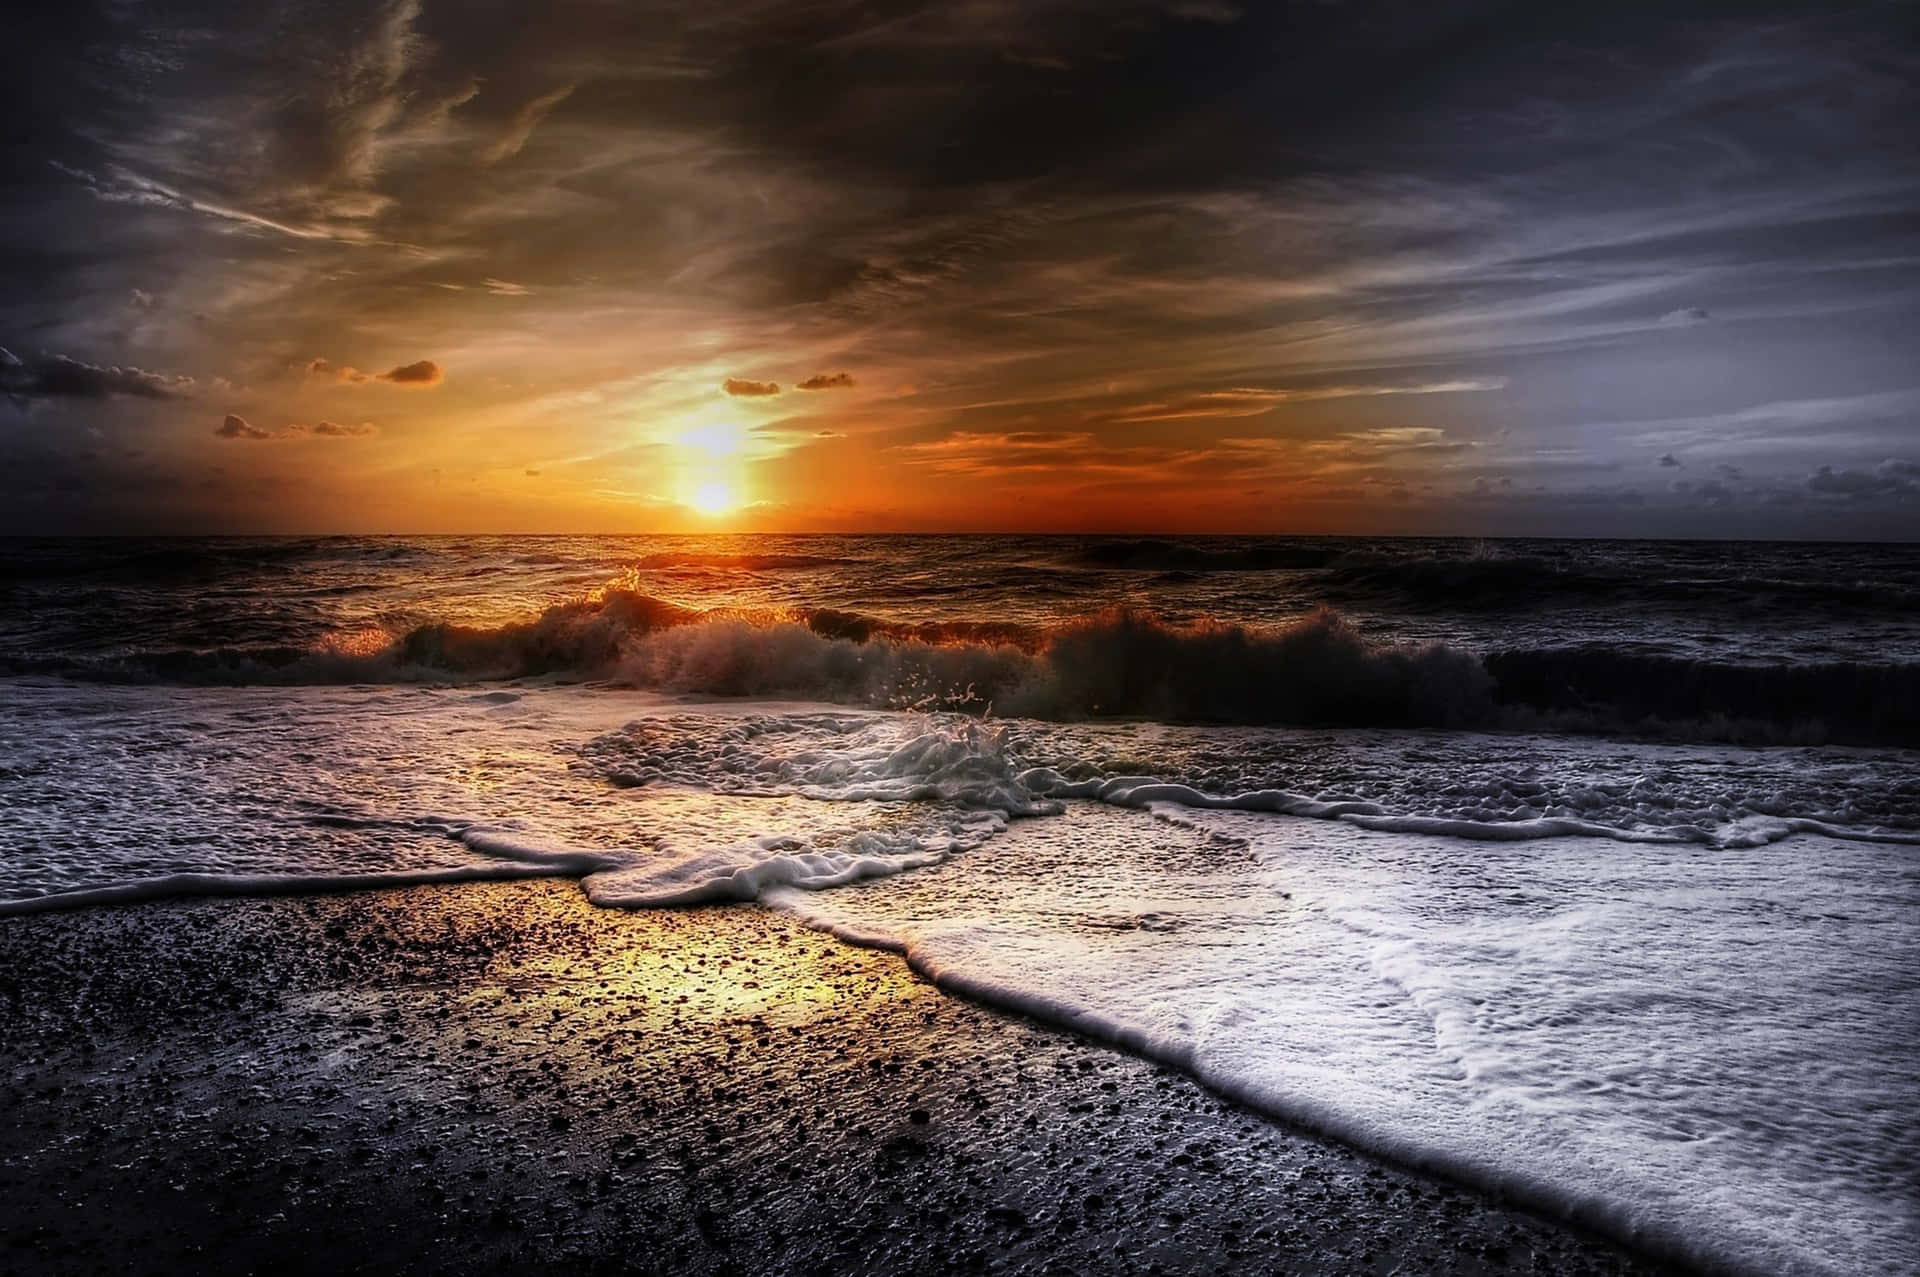 Relax and watch the sunset waves roll in. Wallpaper